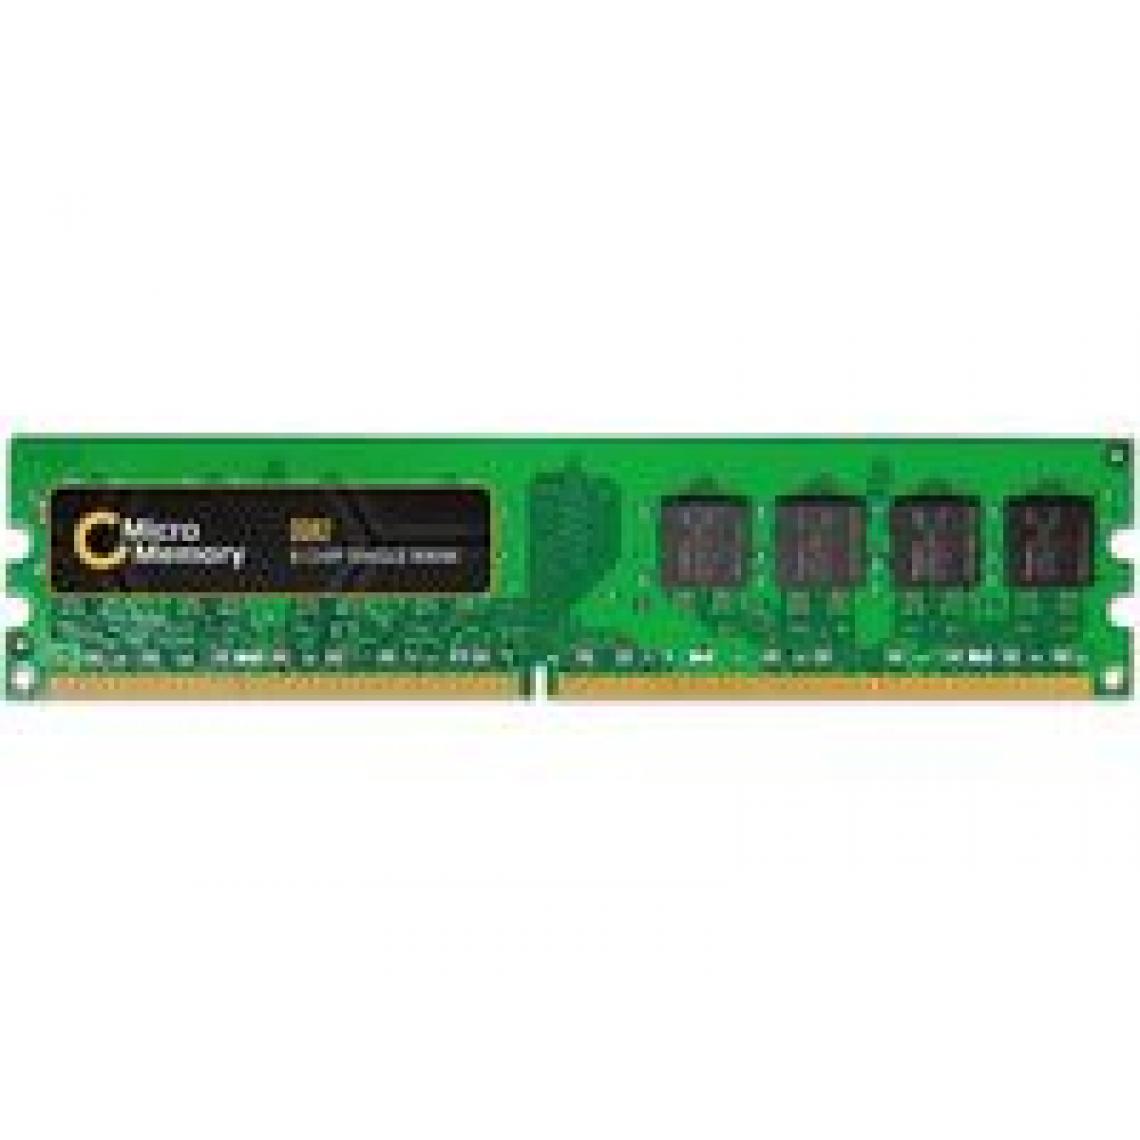 Because Music - 1GB DDR2 667MHZ DIMM Module - RAM PC Fixe